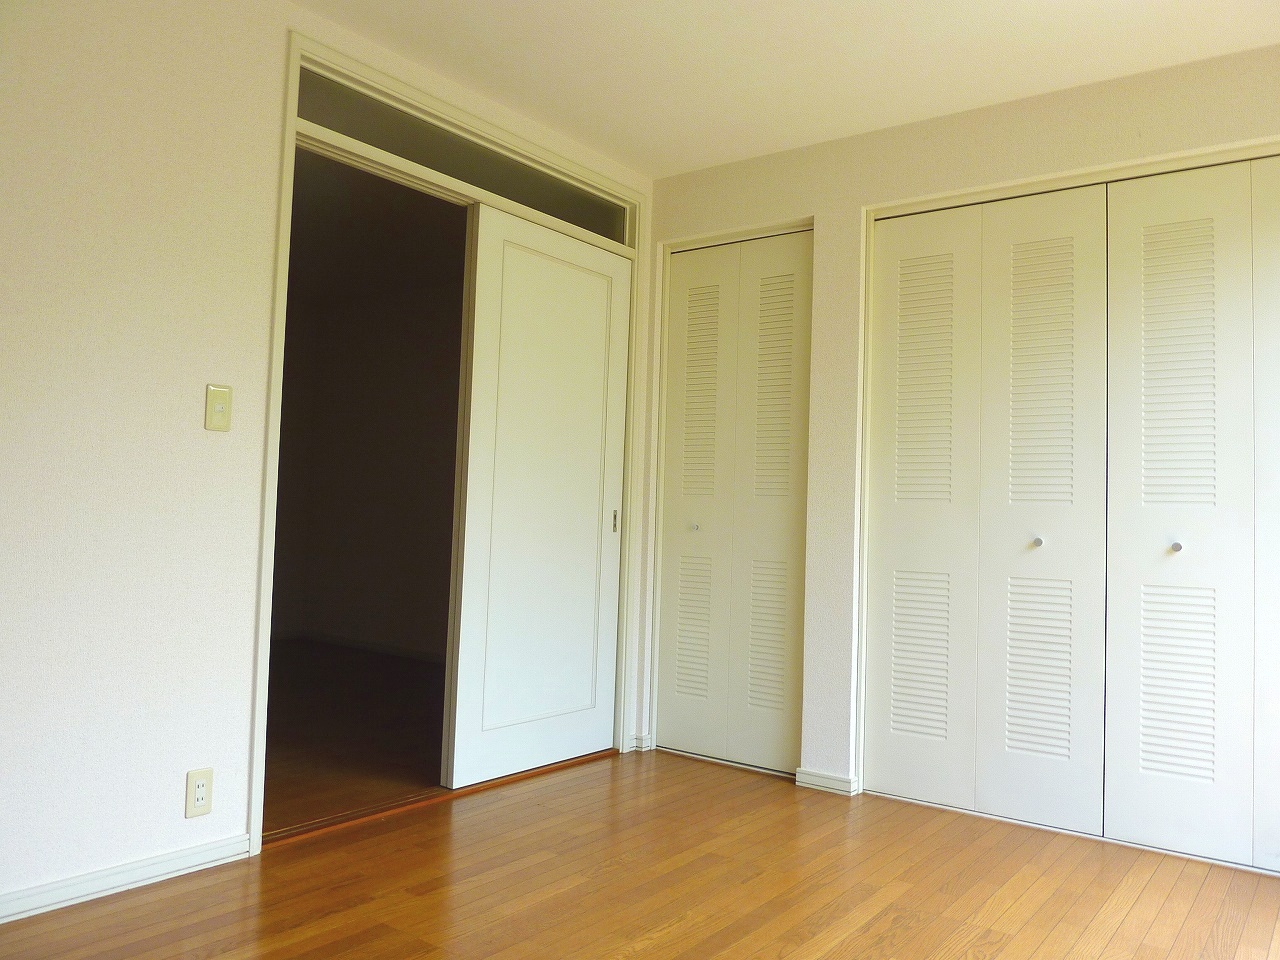 Living and room. It is with storage of Western-style